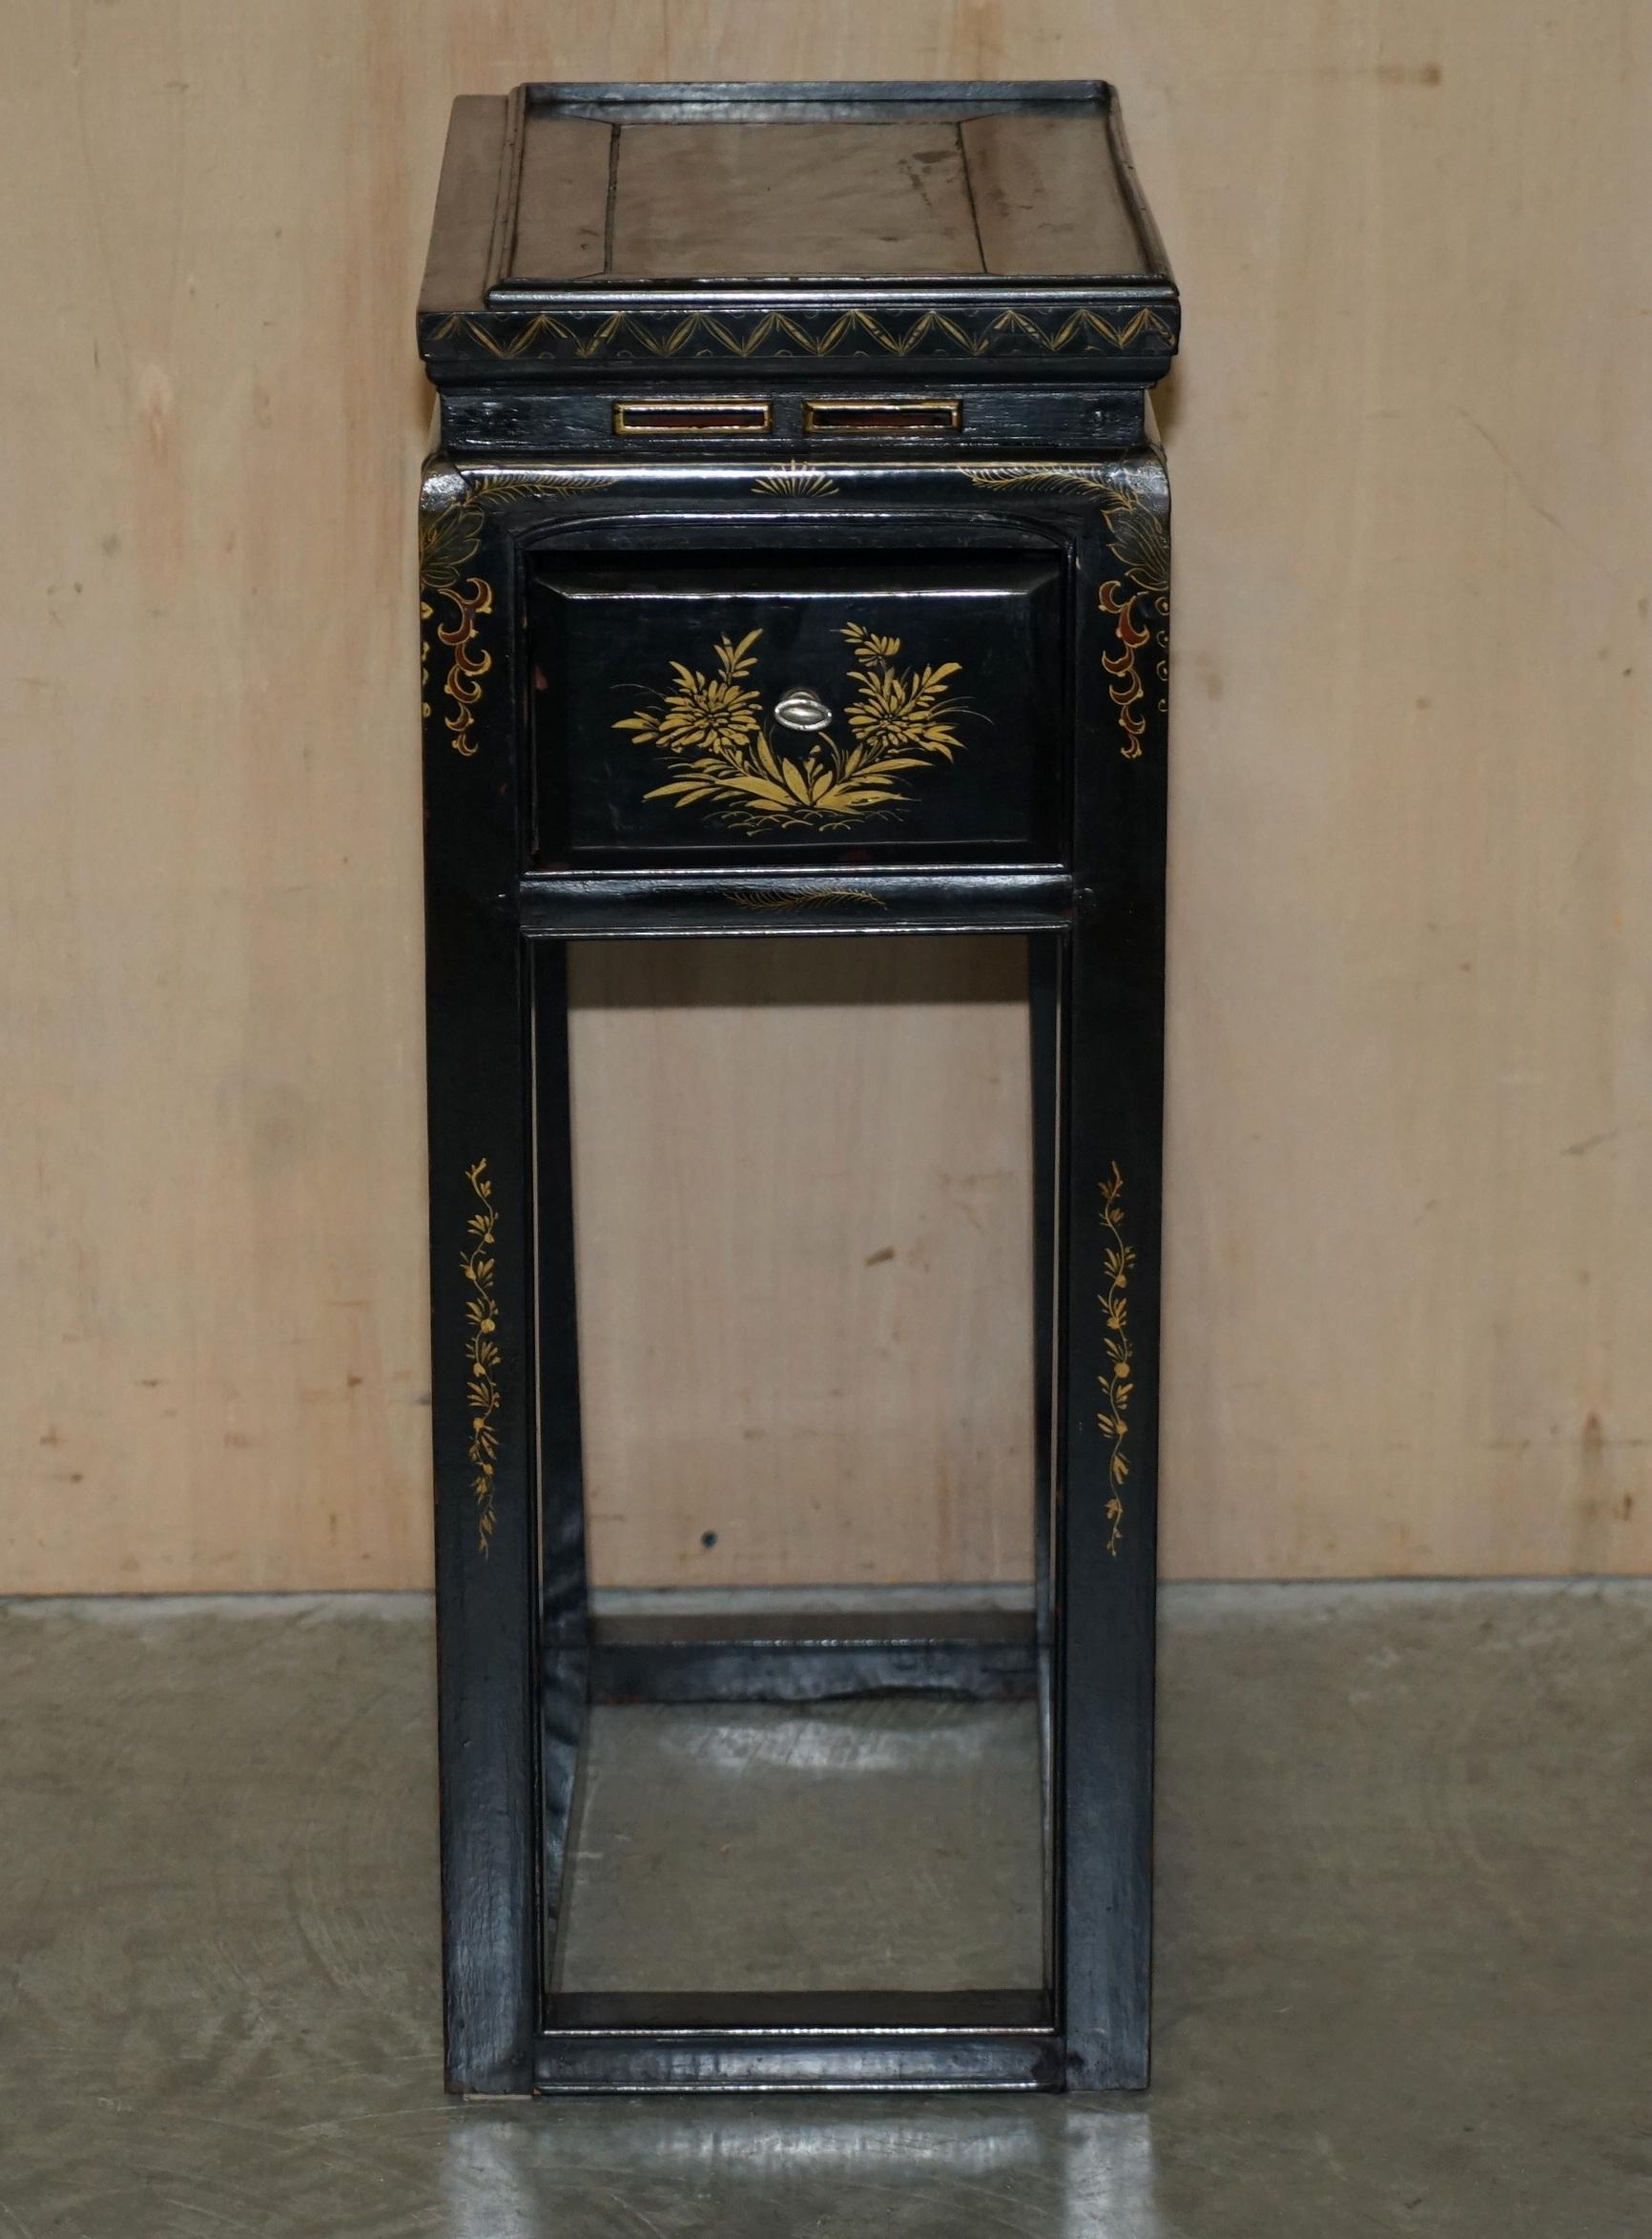  Royal House Antiques

Royal House Antiques is delighted to offer for sale this lovely circa 1880-1900 hand made Chinese Chinoiserie side end lamp table single drawer

Please note the delivery fee listed is just a guide, it covers within the M25